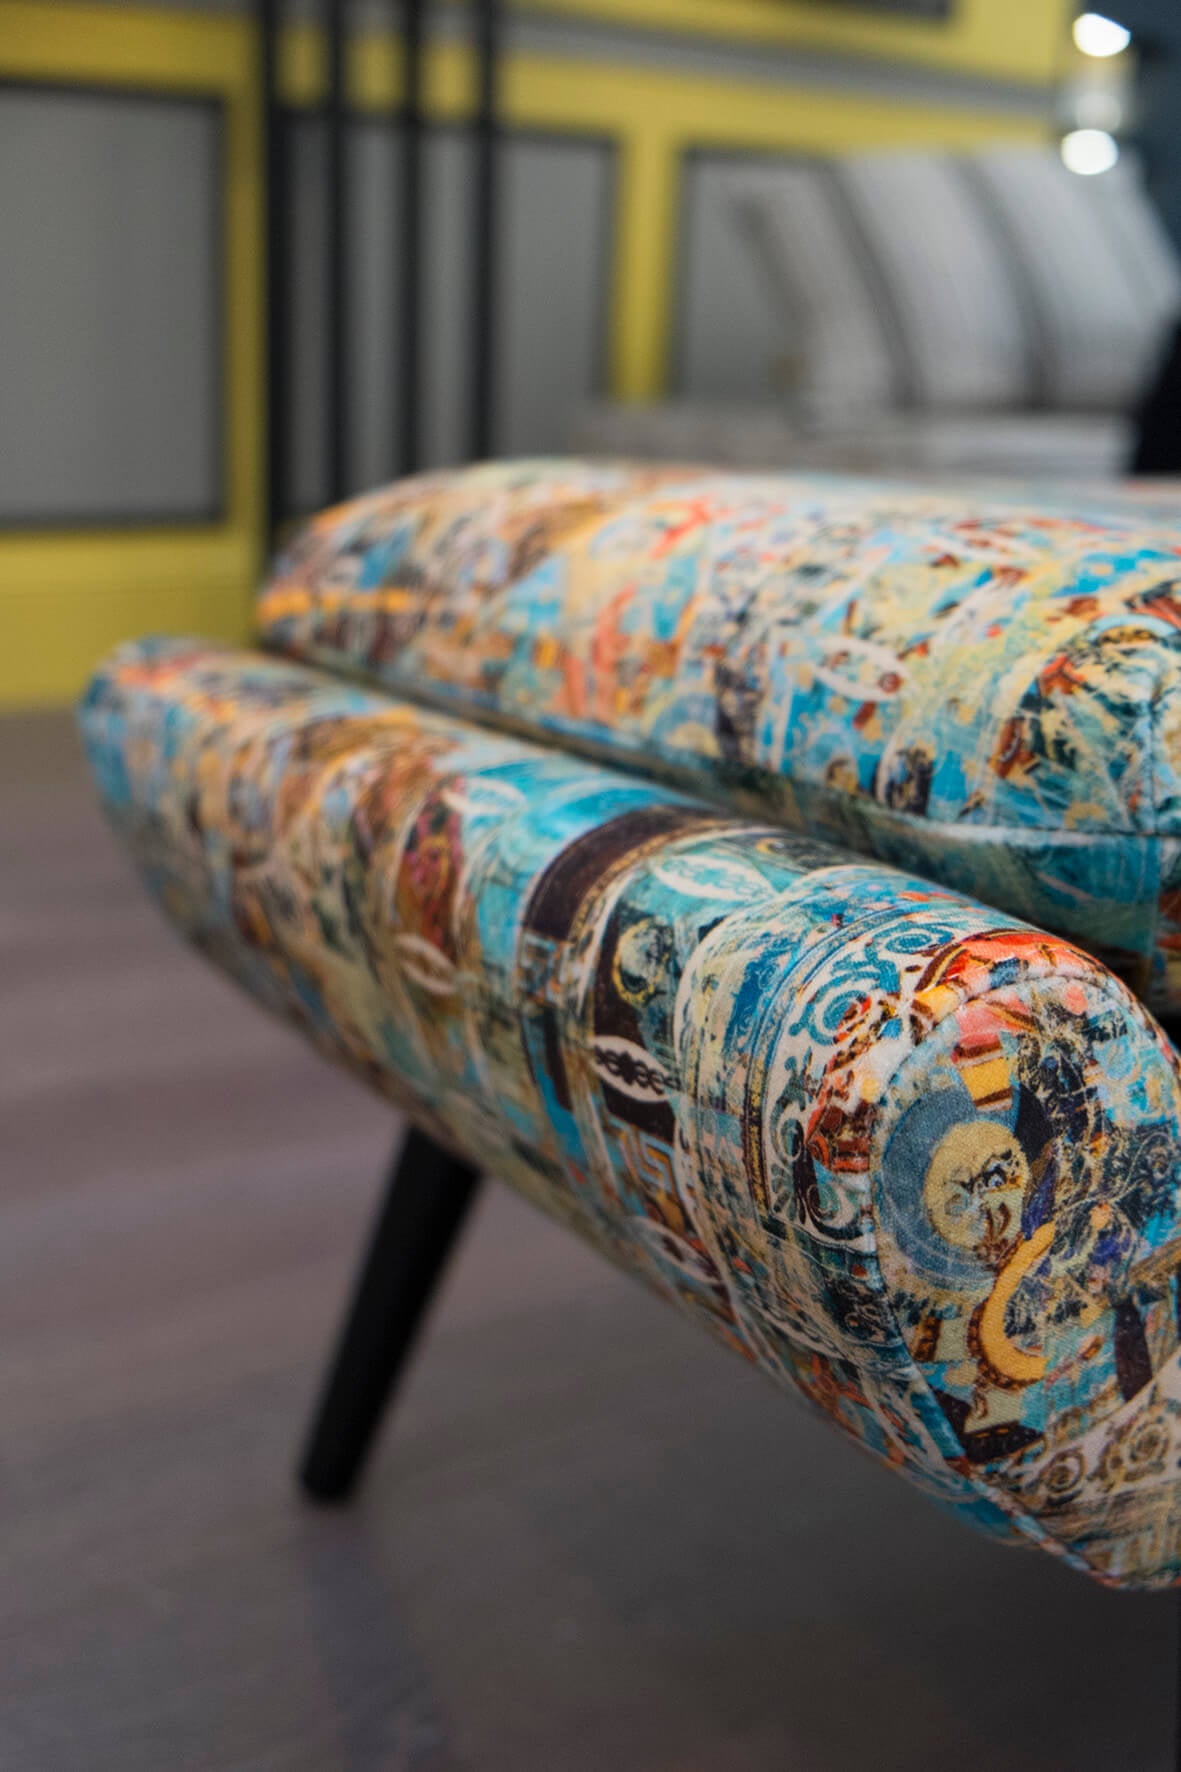 Capriccio Velvet Fabric by Blackpop for AUTHOR's collection of British-made luxury homeware